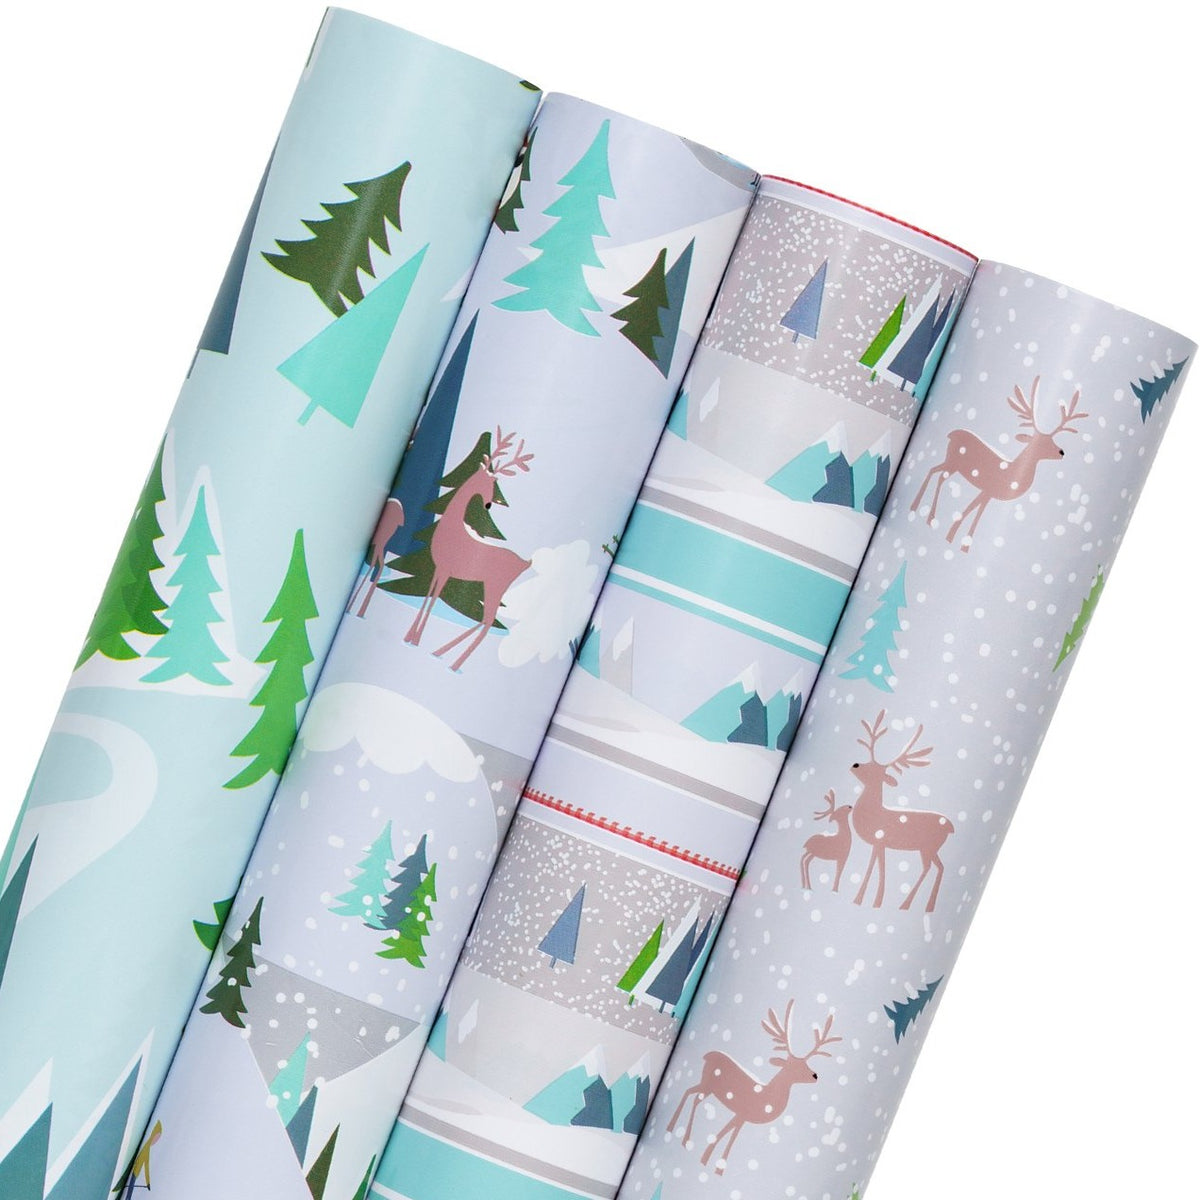 Wrapaholic Christmas Red & White Gift Wrapping Paper - 4 Rolls